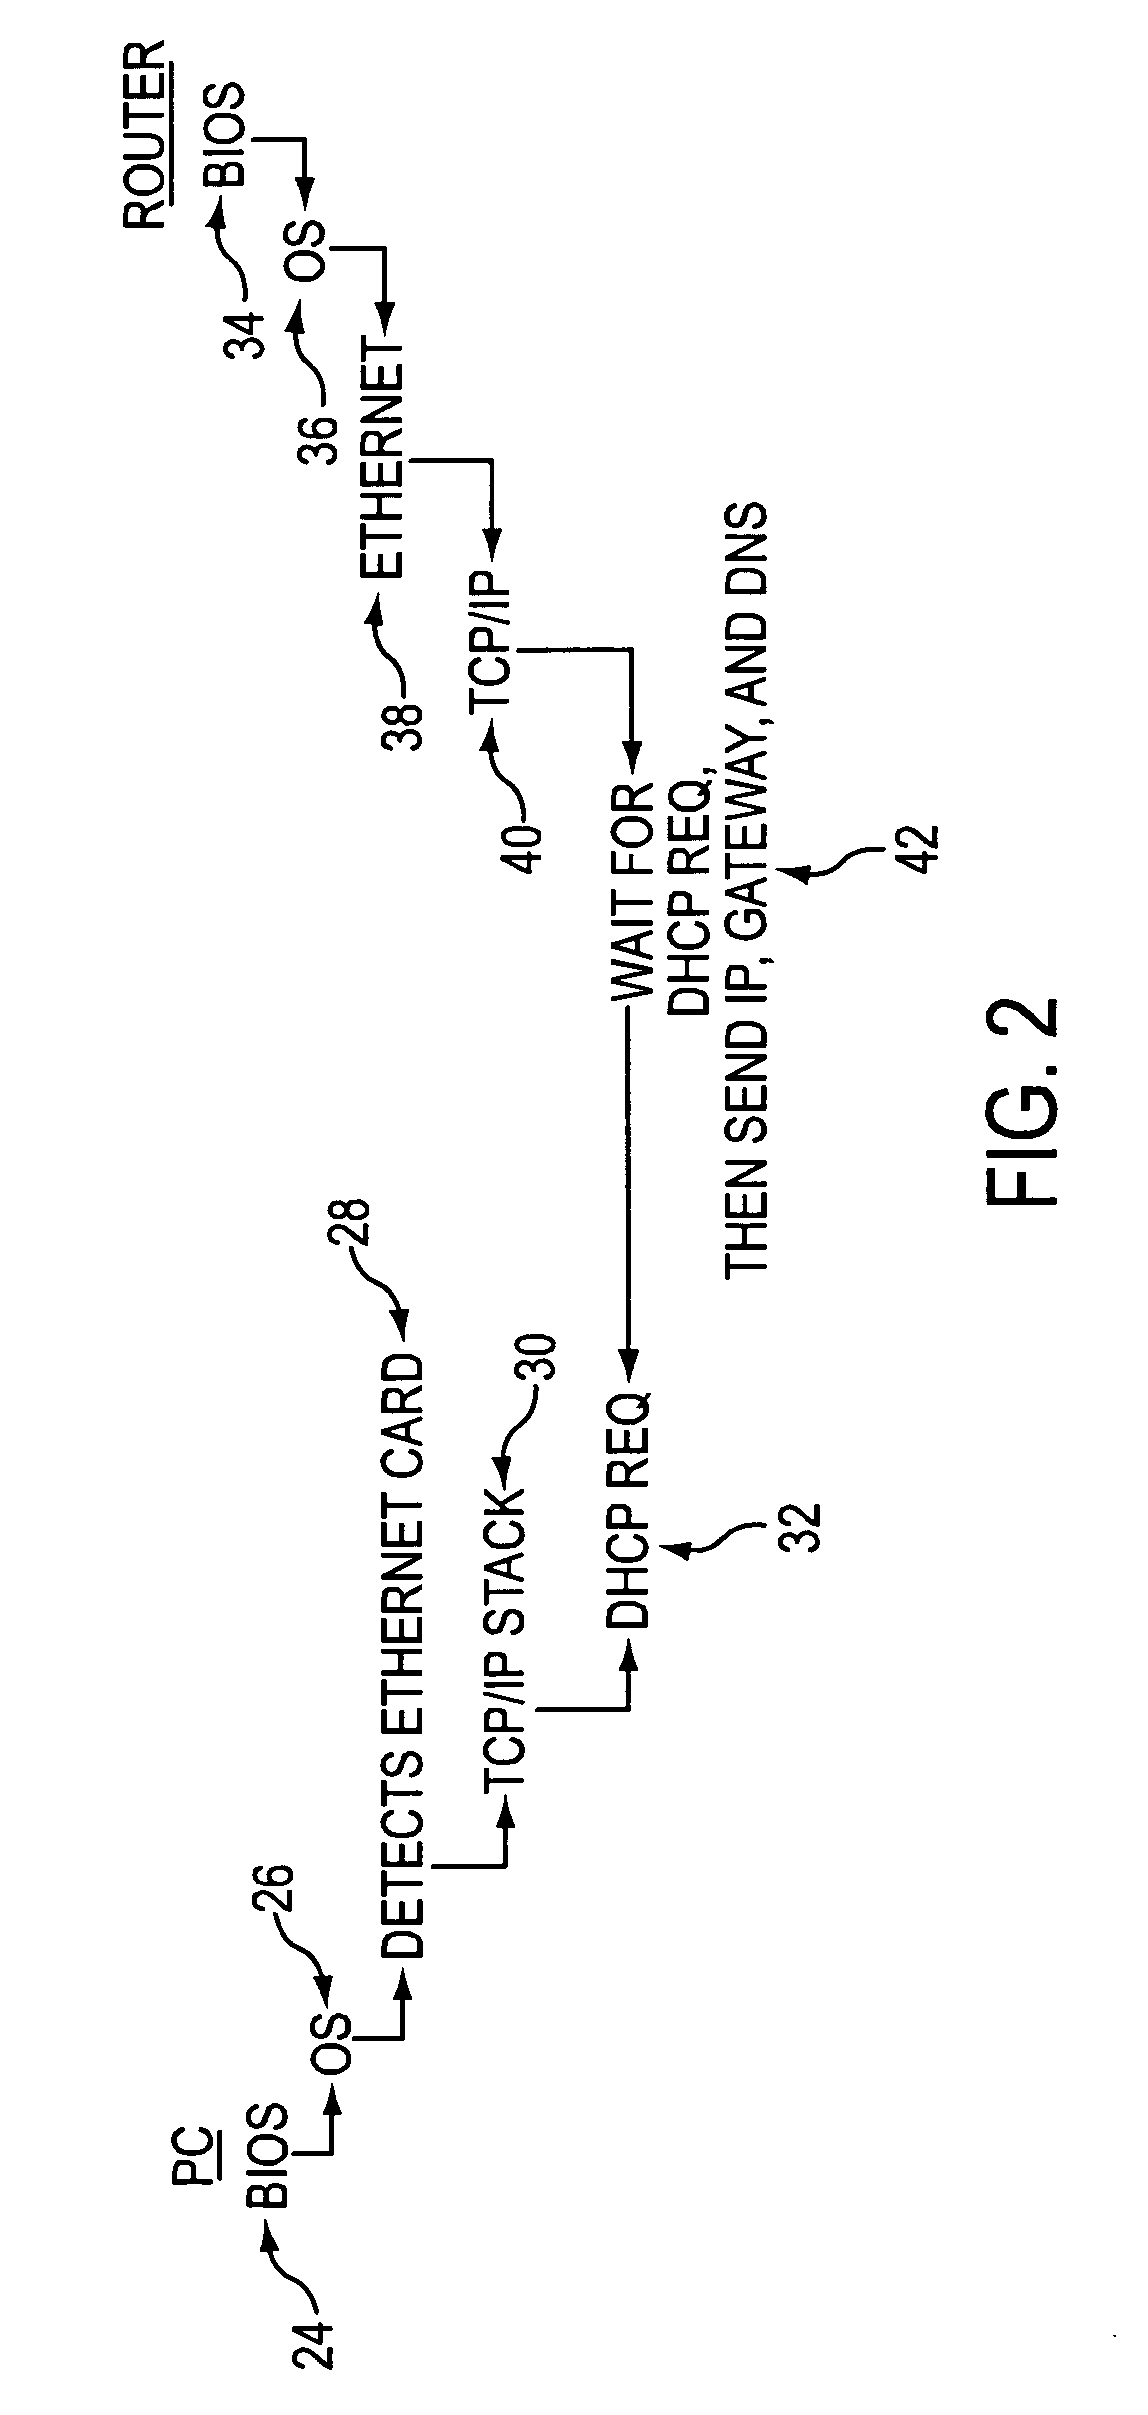 Router with automatic protocol configuration and methods of use